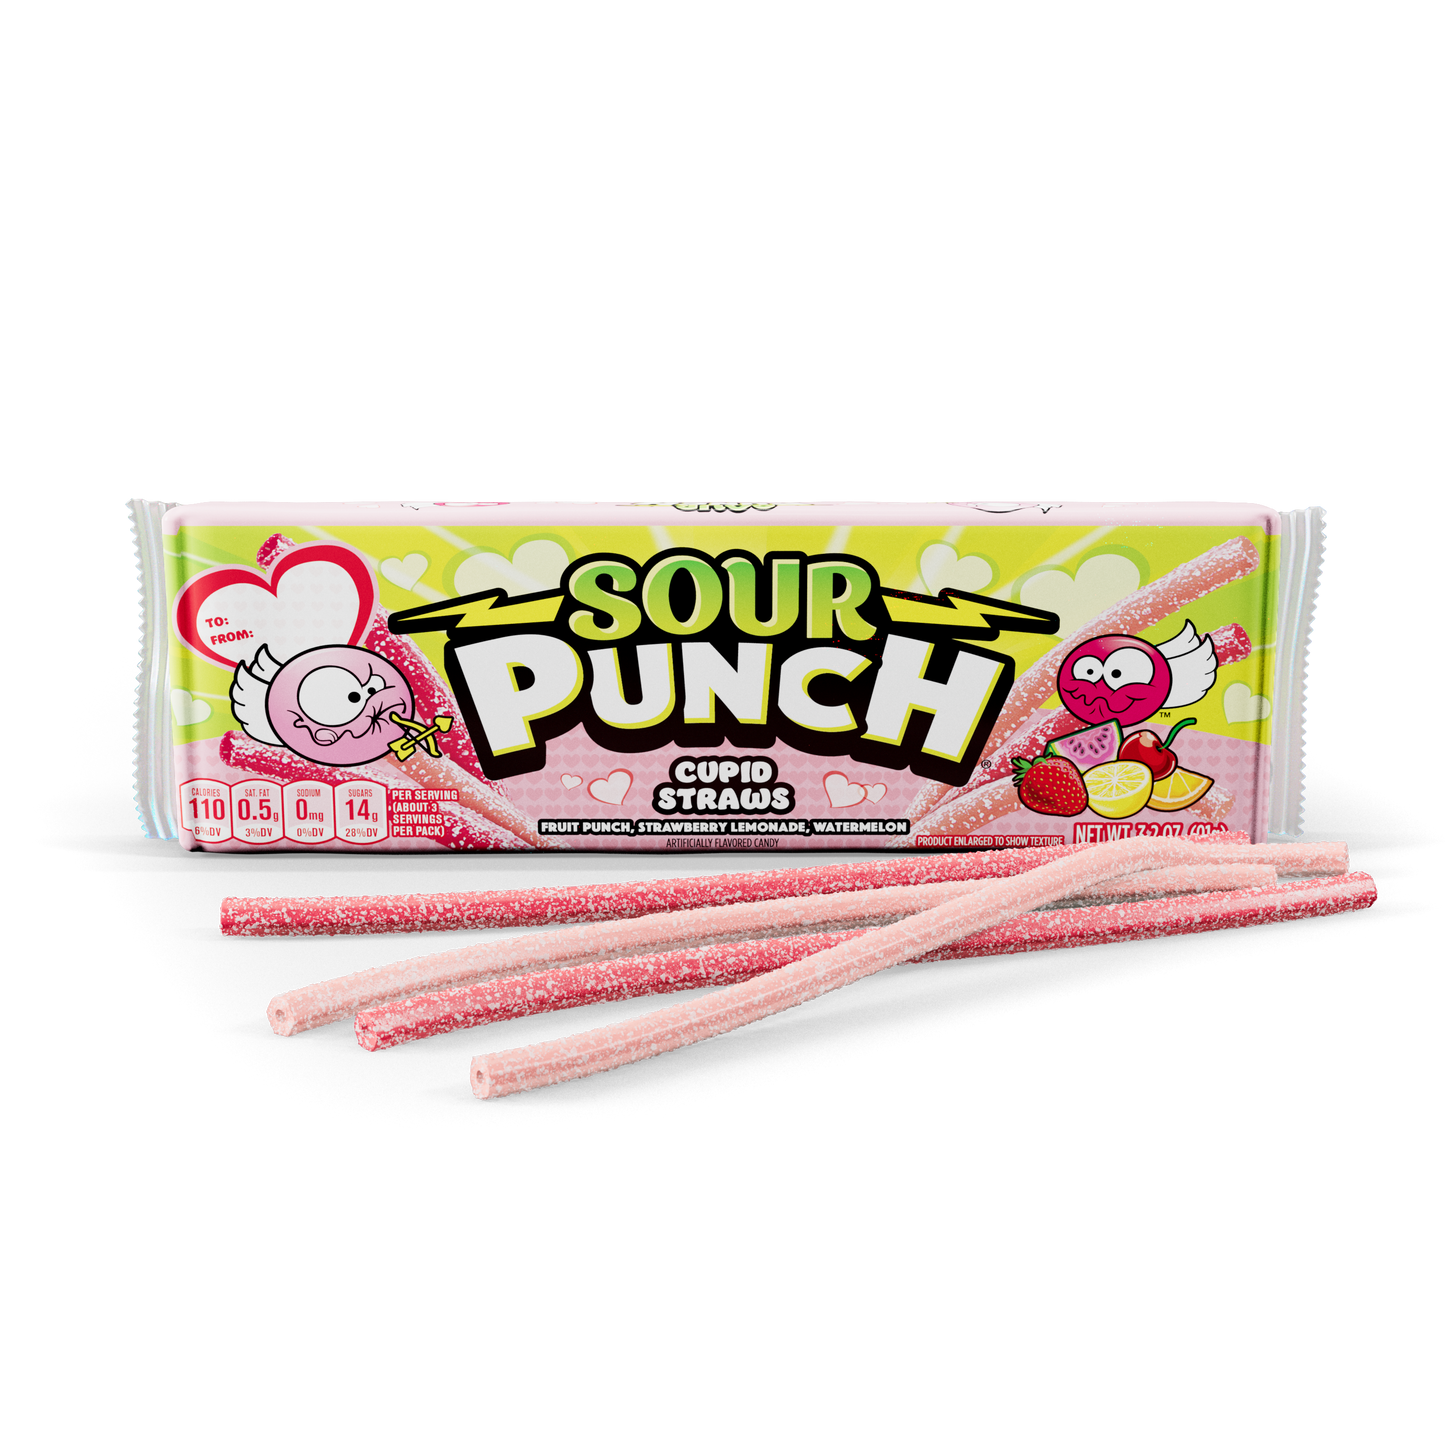 SOUR PUNCH Cupid Straws 3.2oz tray with assorted candy straws in front